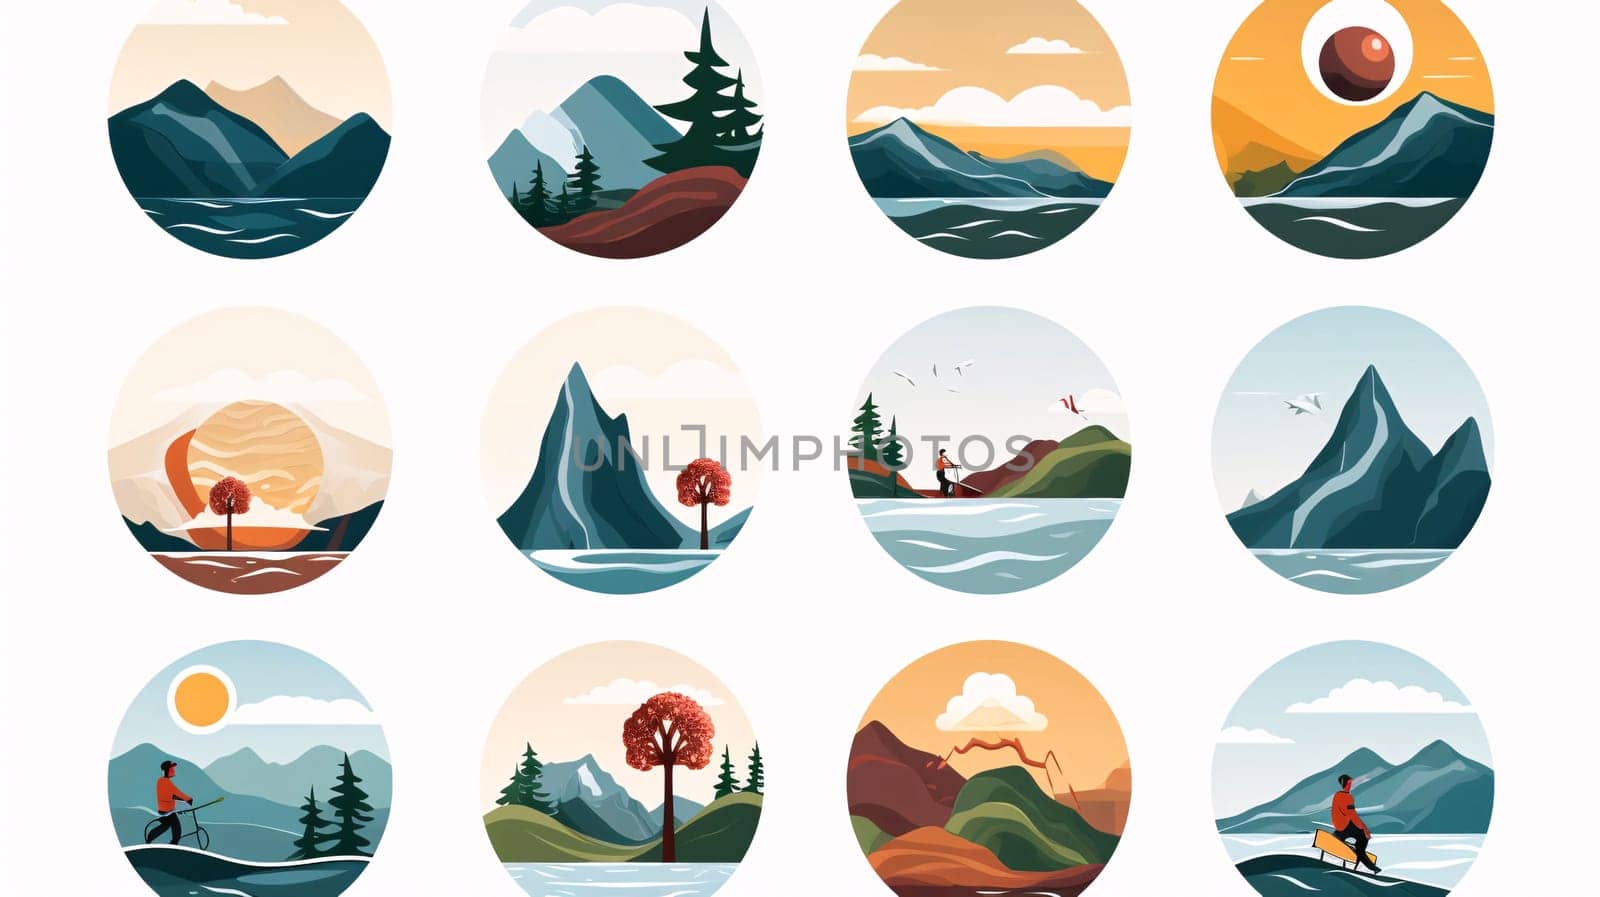 New icons collection: Mountains and lake icon set in flat style. Vector illustration.